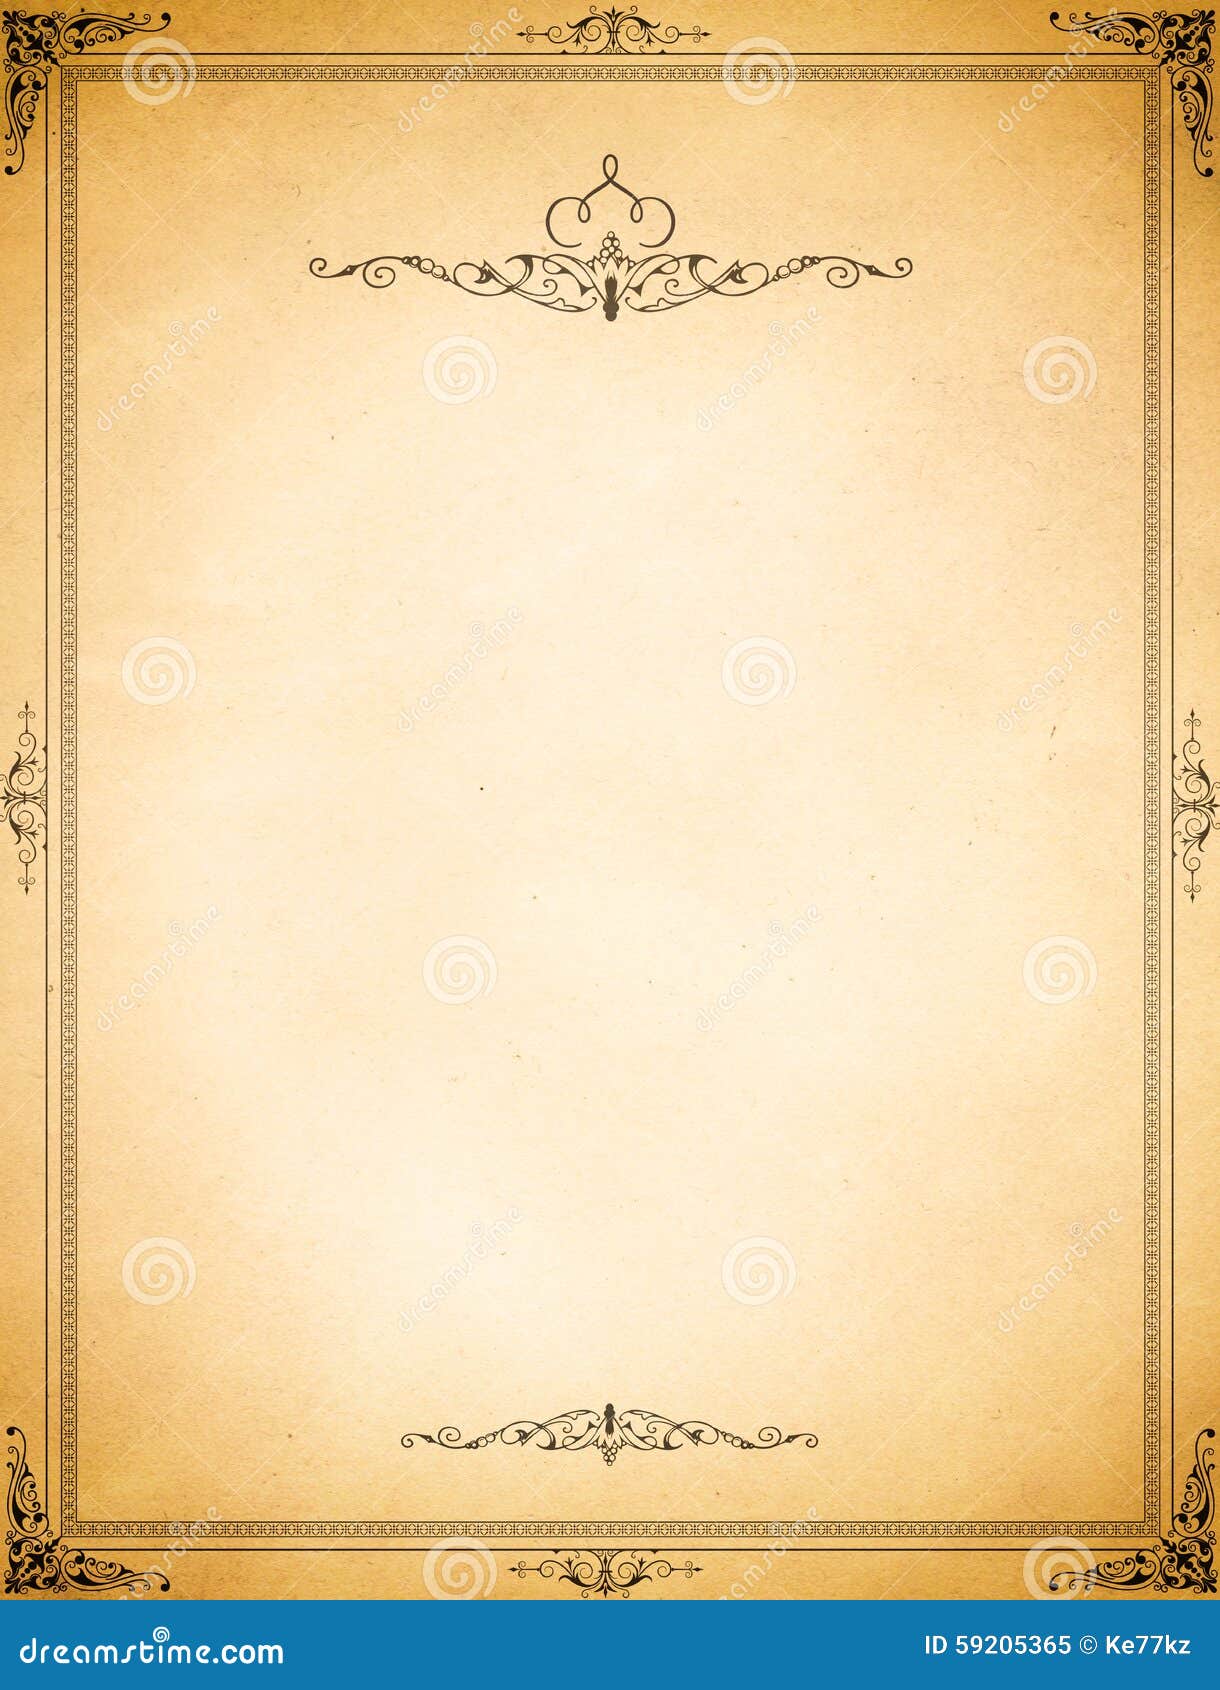 Old Paper With Decorative Vintage Border. Stock Photography